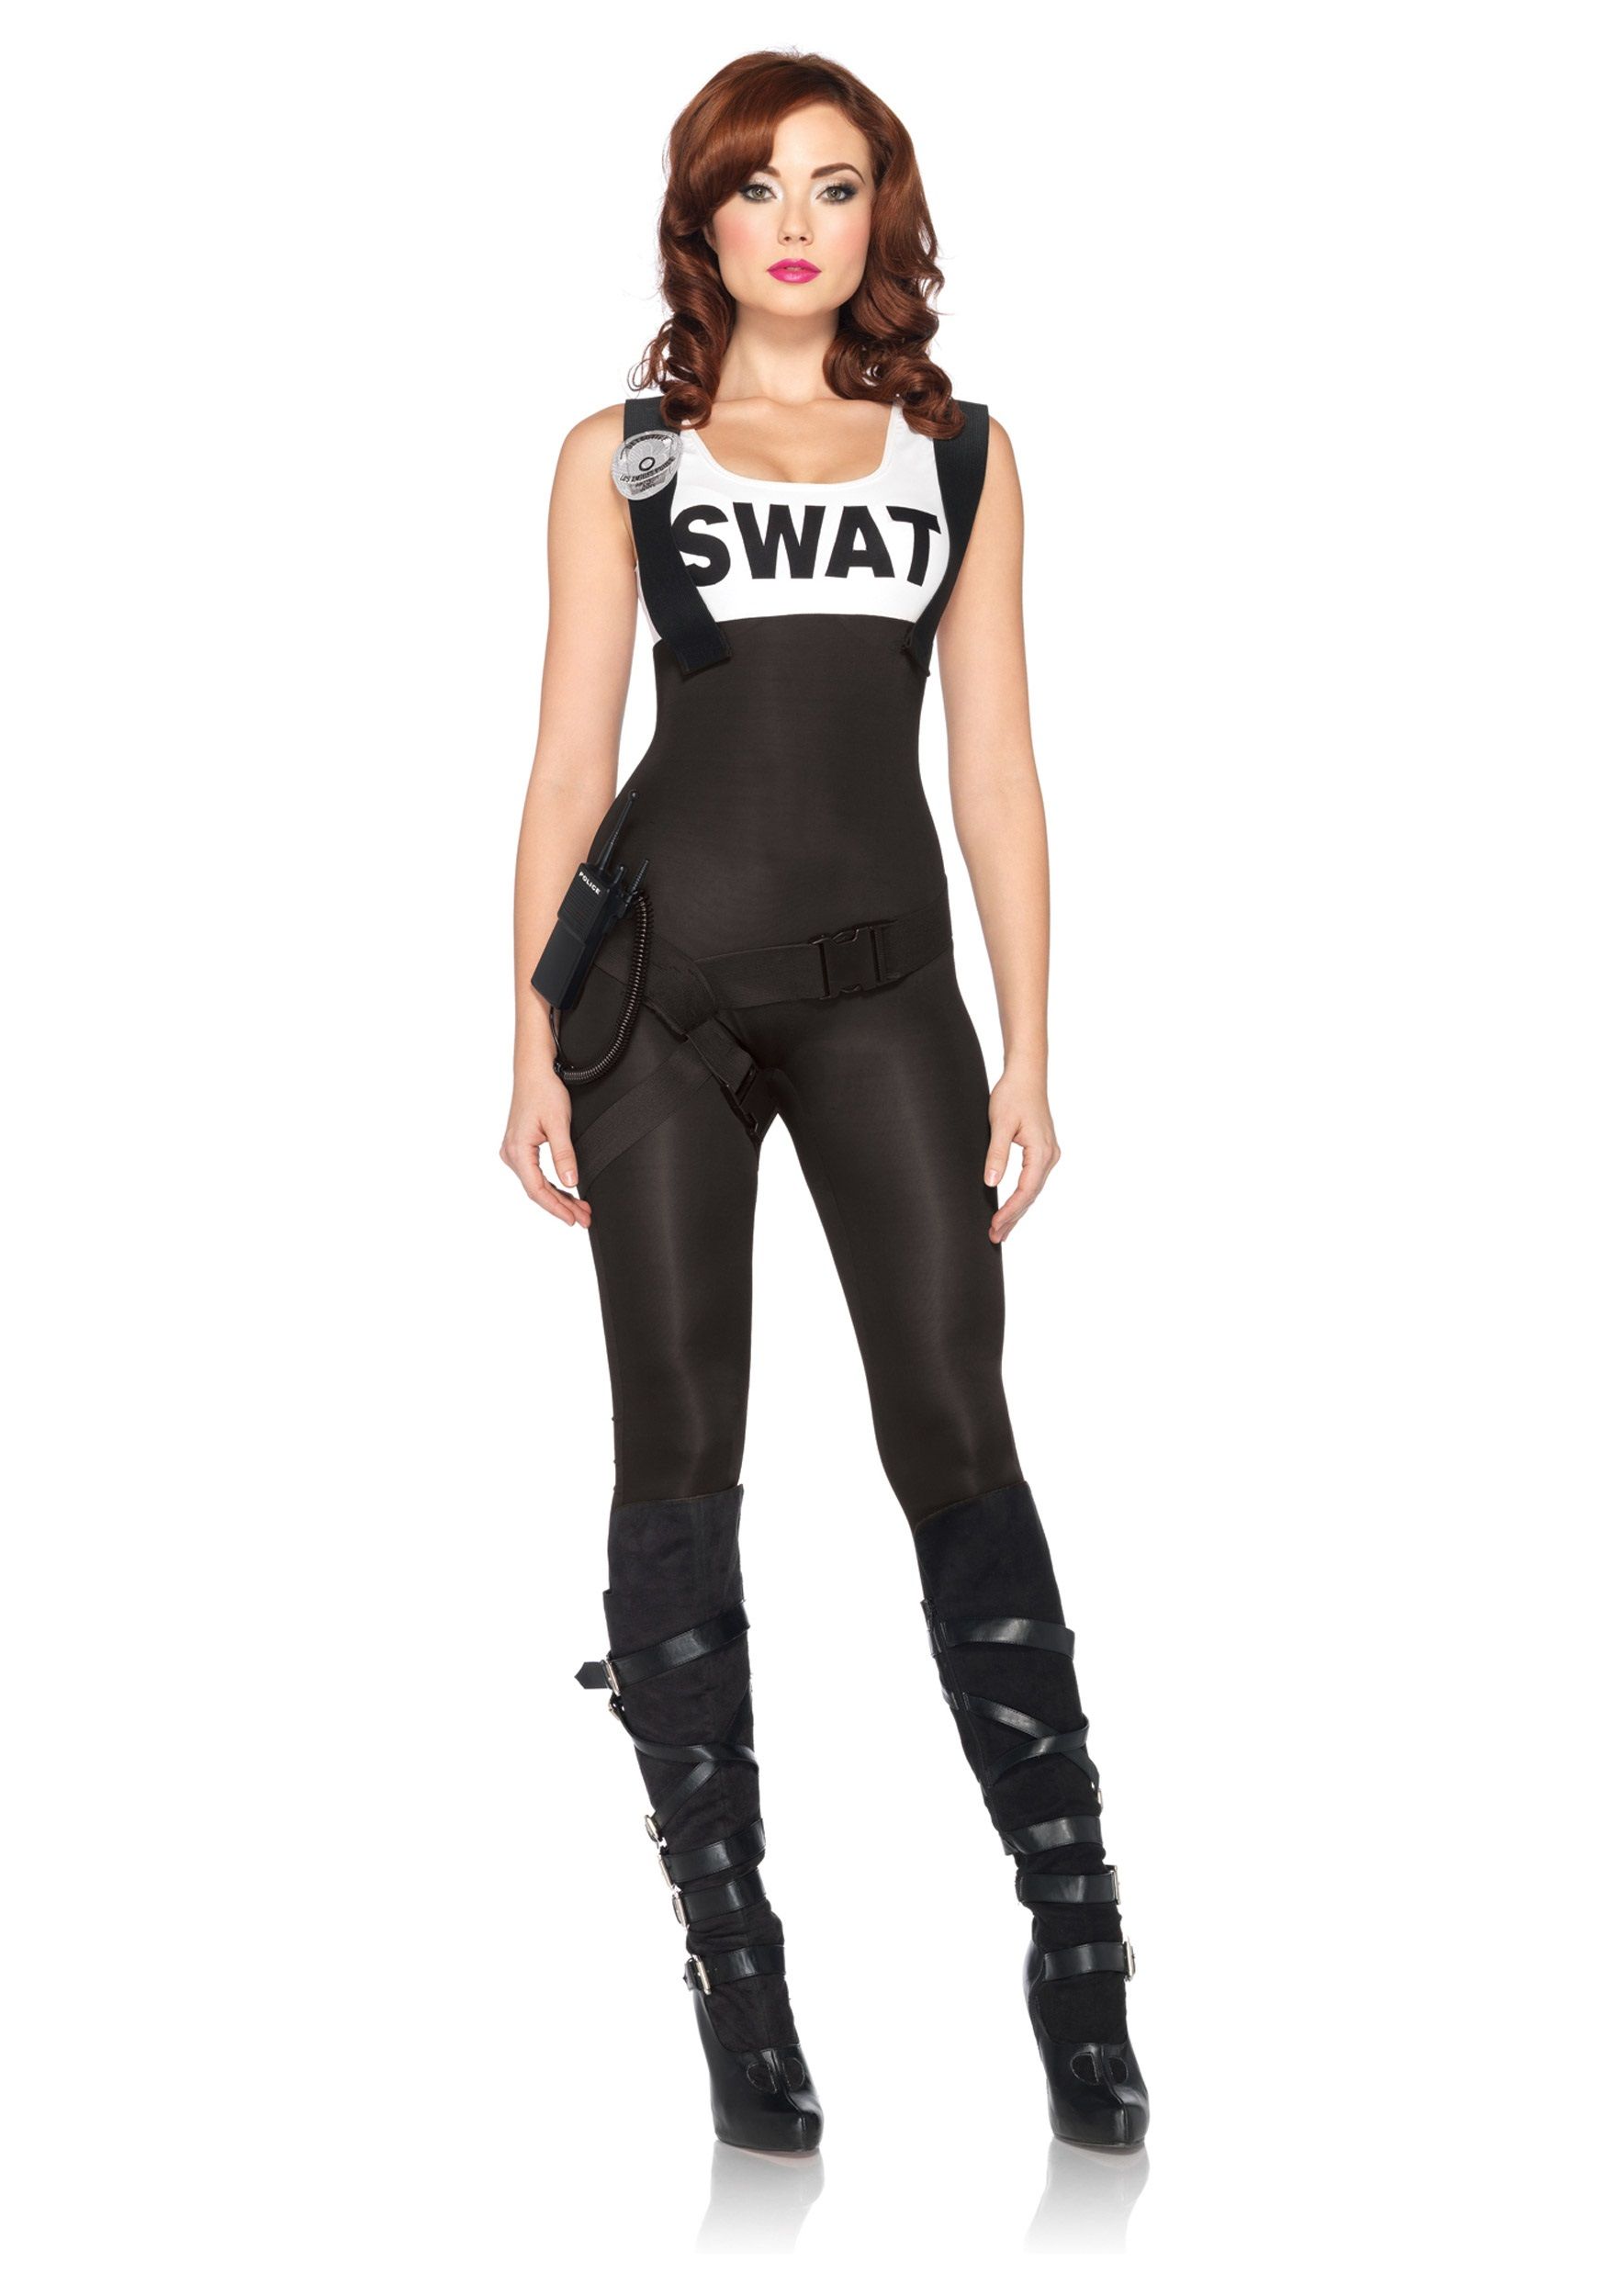 <strong> SWAT Team Member</strong> -   17 Sexy Halloween Costumes